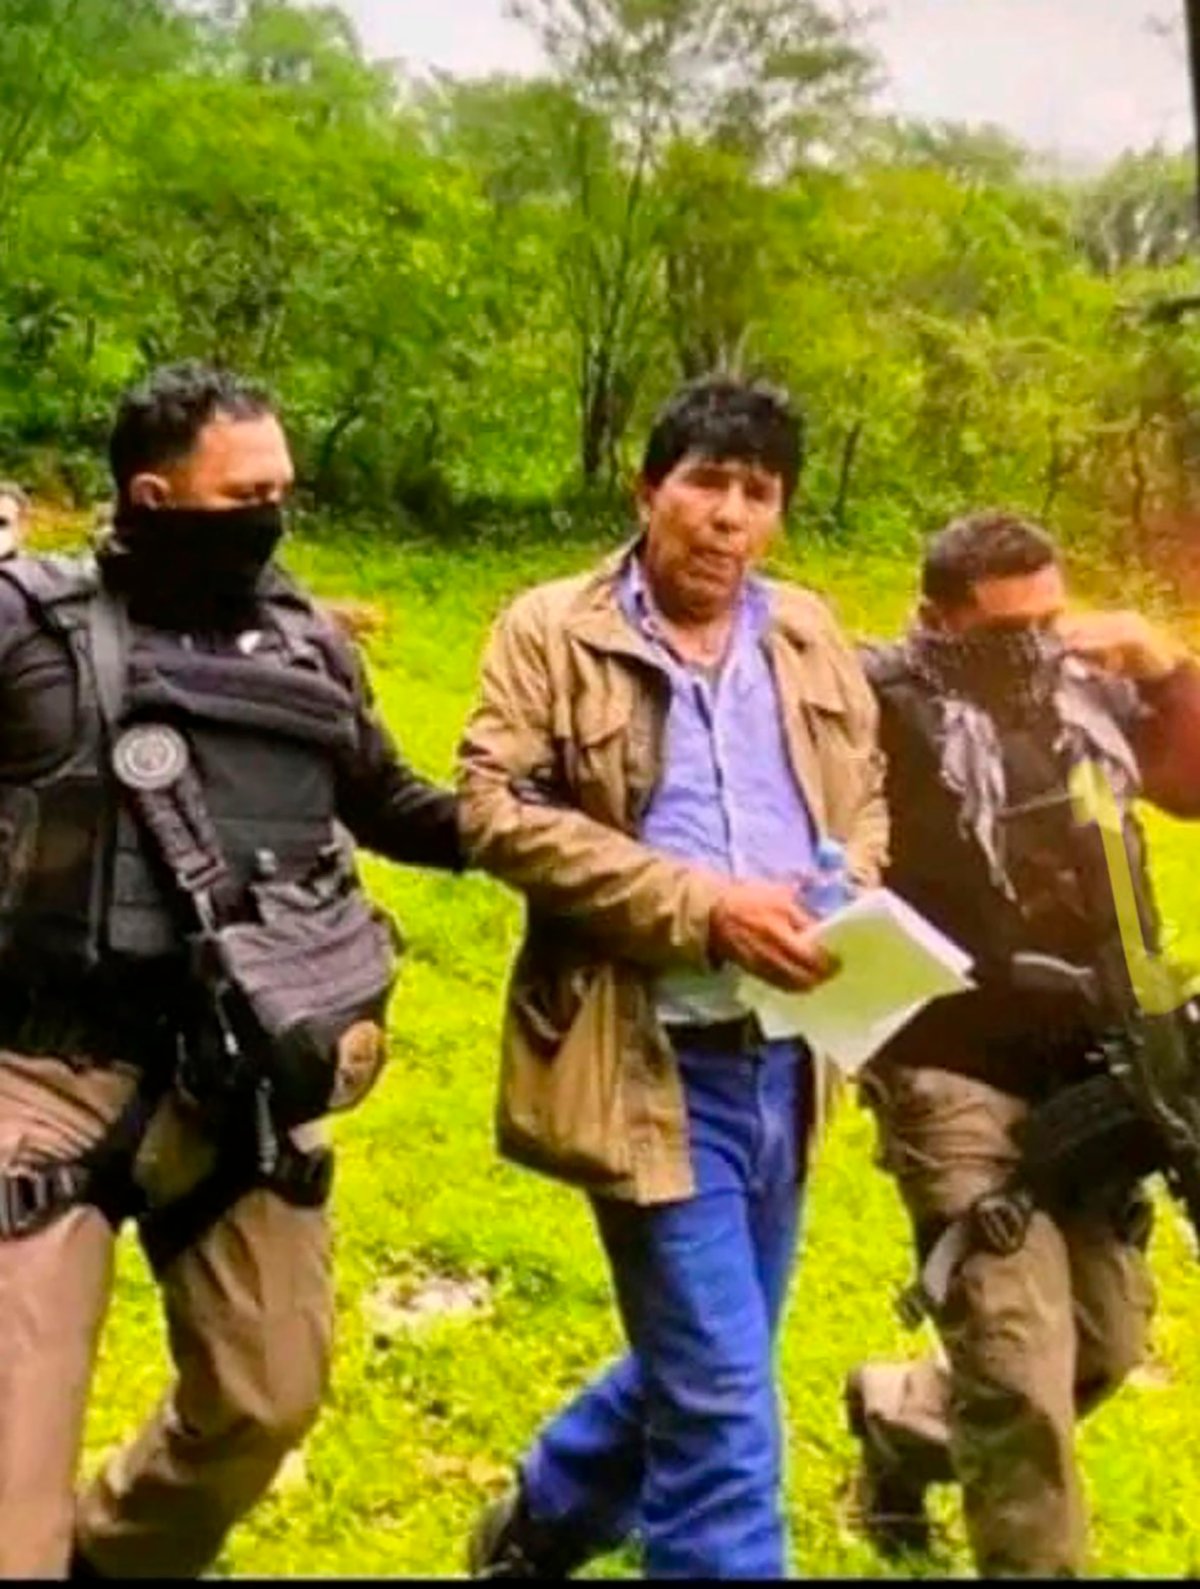 Mexico’s capture of infamous drug lord Rafael Caro Quintero could be